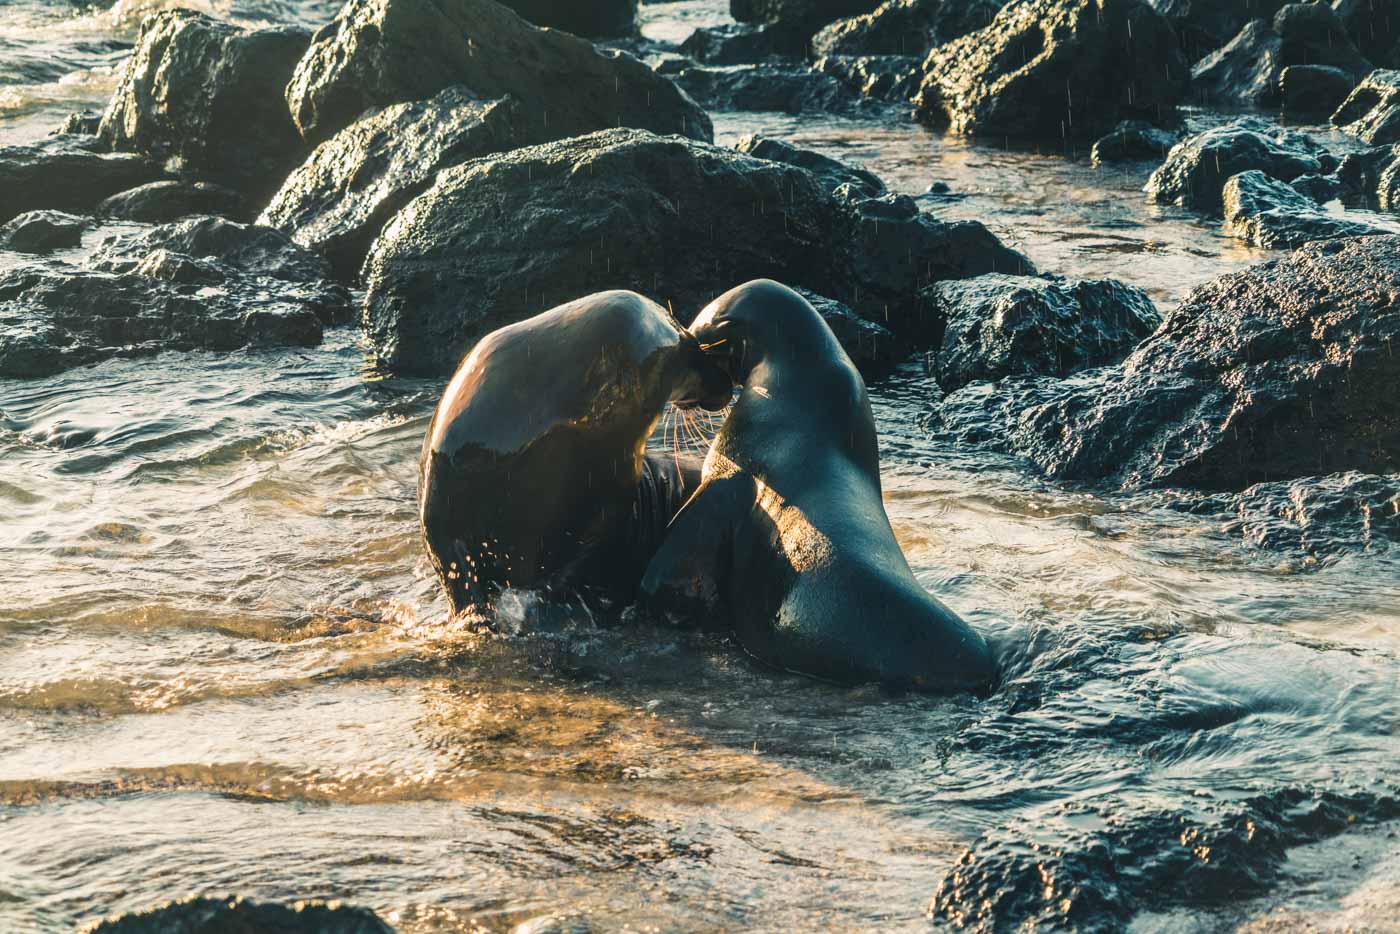 How to Plan a Responsible Trip to the Galapagos Islands